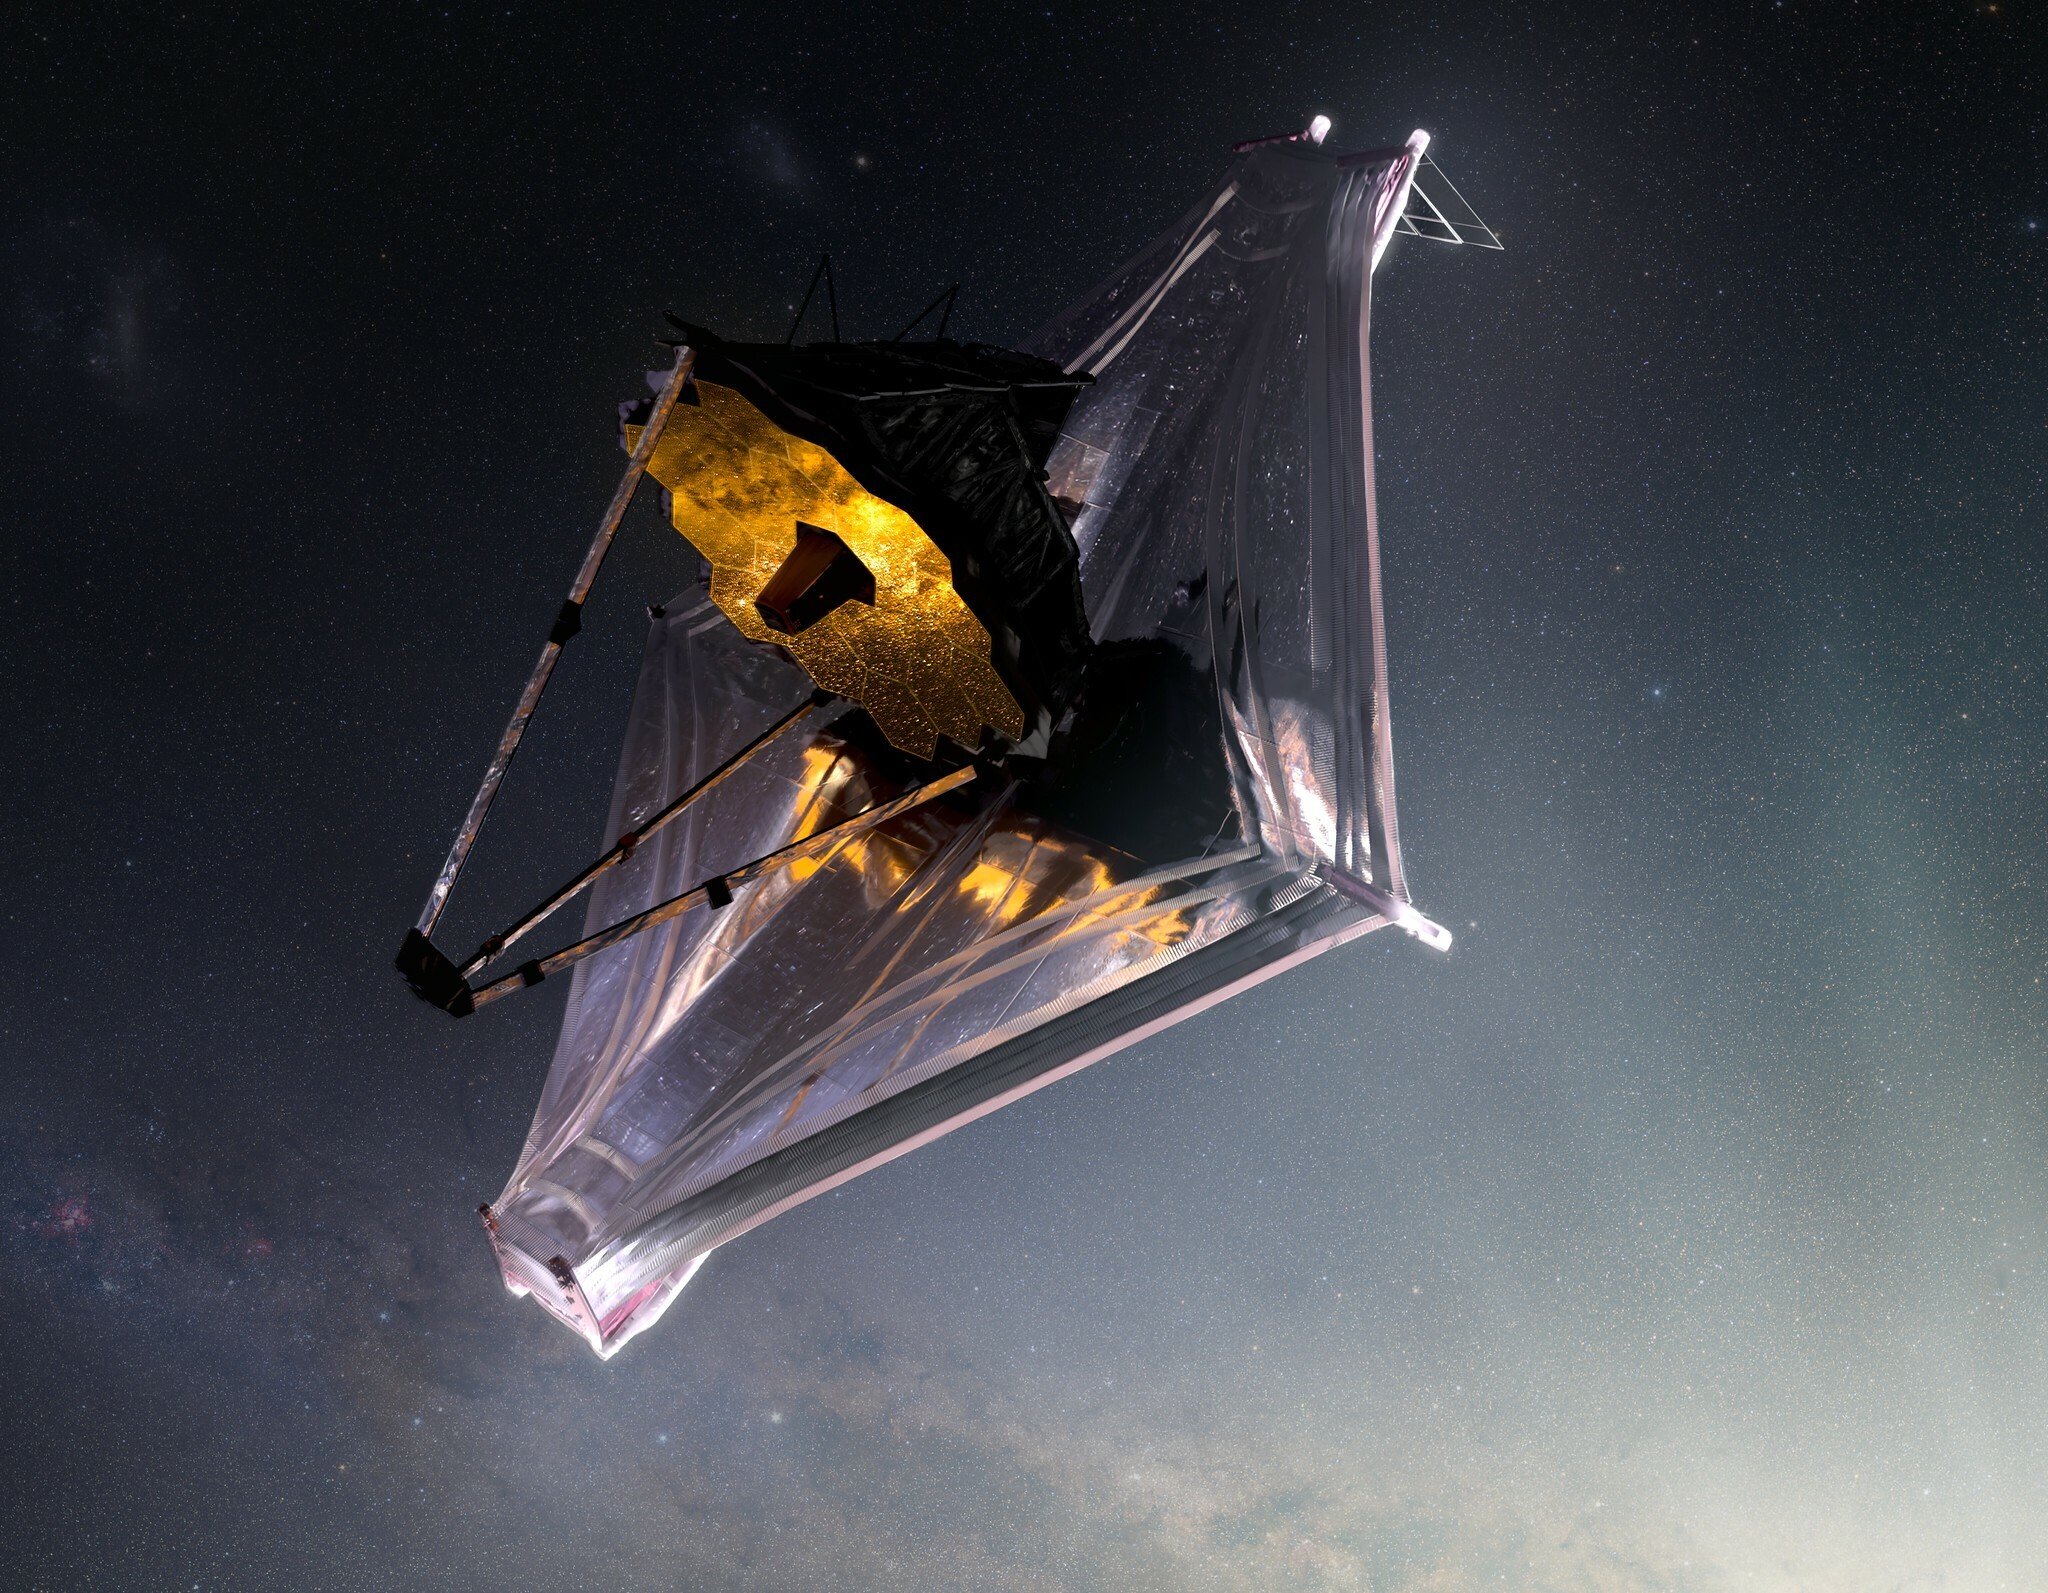 An artist's conception of the James Webb Space Telescope orbiting in space, 1 million miles from Earth.